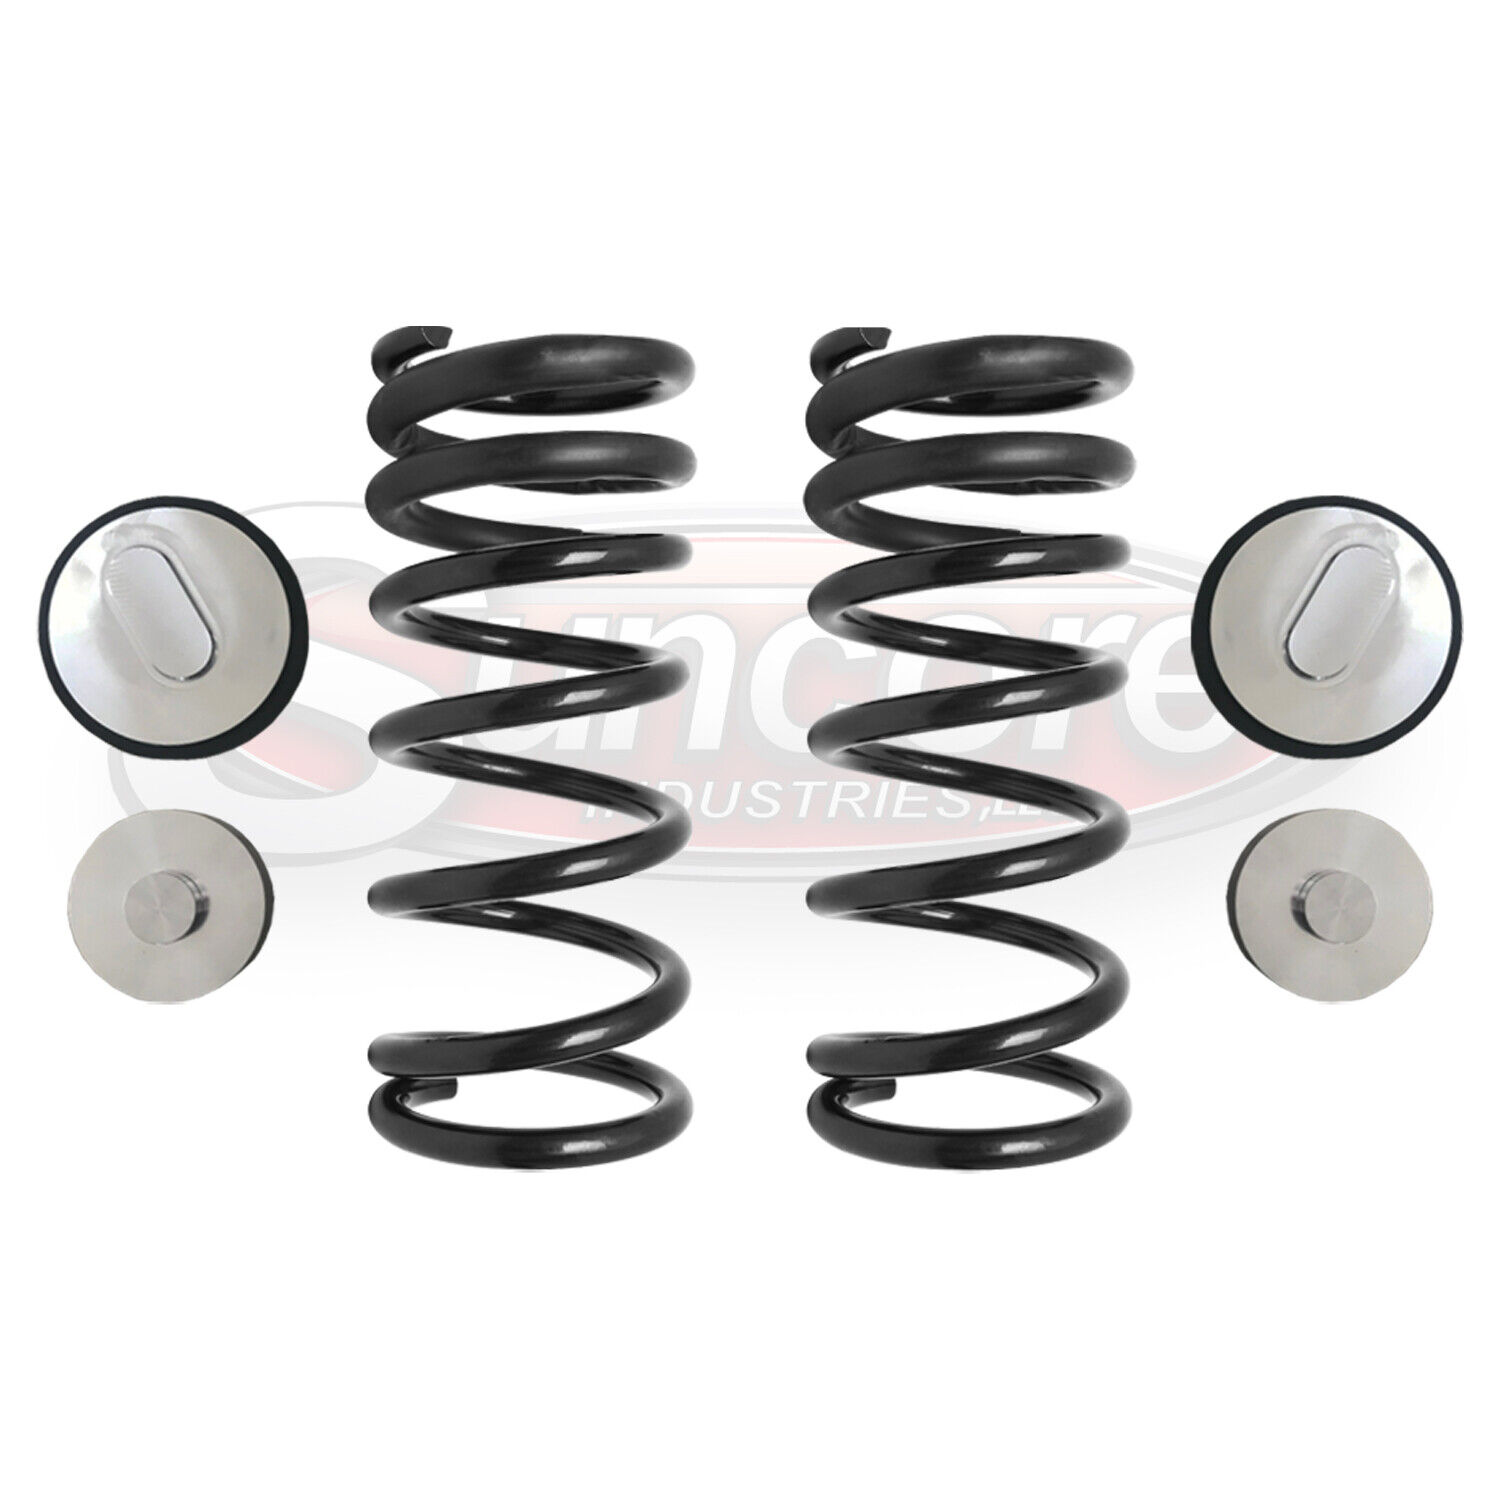 1995-2002 Lincoln Continental Rear Air Suspension to Coil Spring Conversion Kit